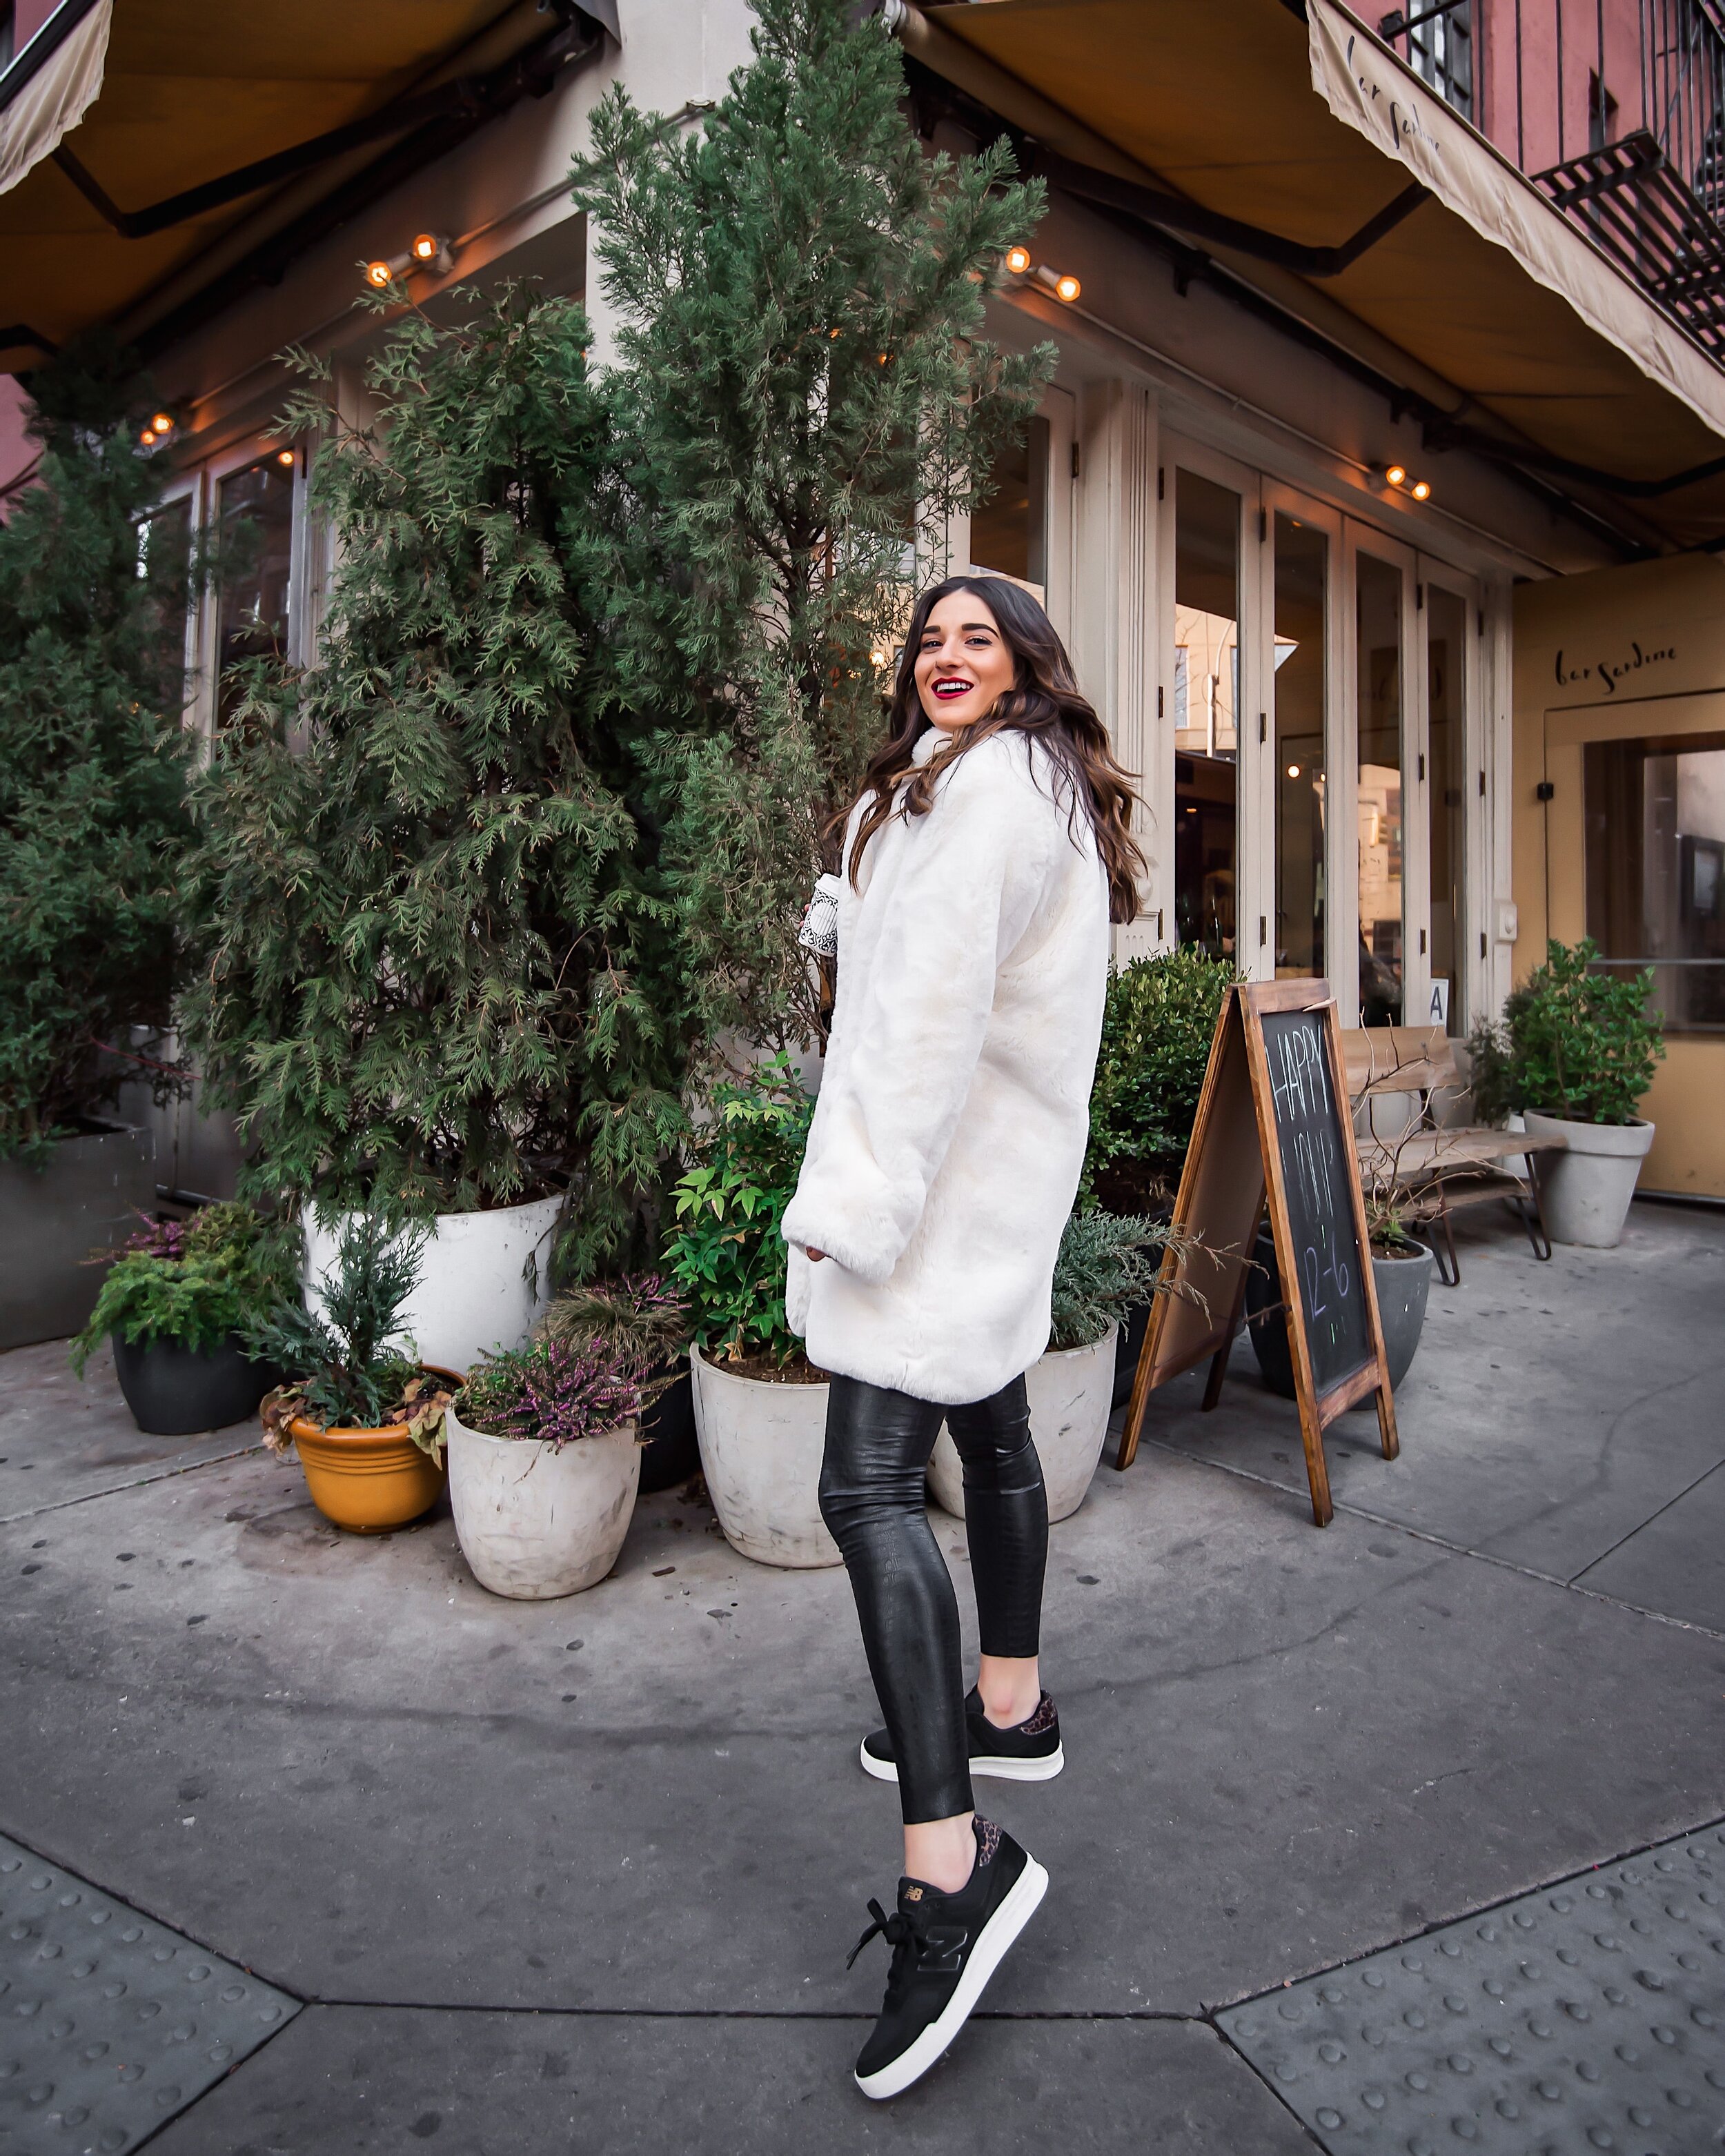 White Fur Coat Black Snakeskin Leggings Esther Santer NYC Street Style Fashion Blog Winter Outfit OOTD  Faux Fur Commando Nordstrom Maman Coffee Happy Girl Women Shopping Buy Red Lipstick Taxi Photography Manhattan Comfortable West Village Location.JPG